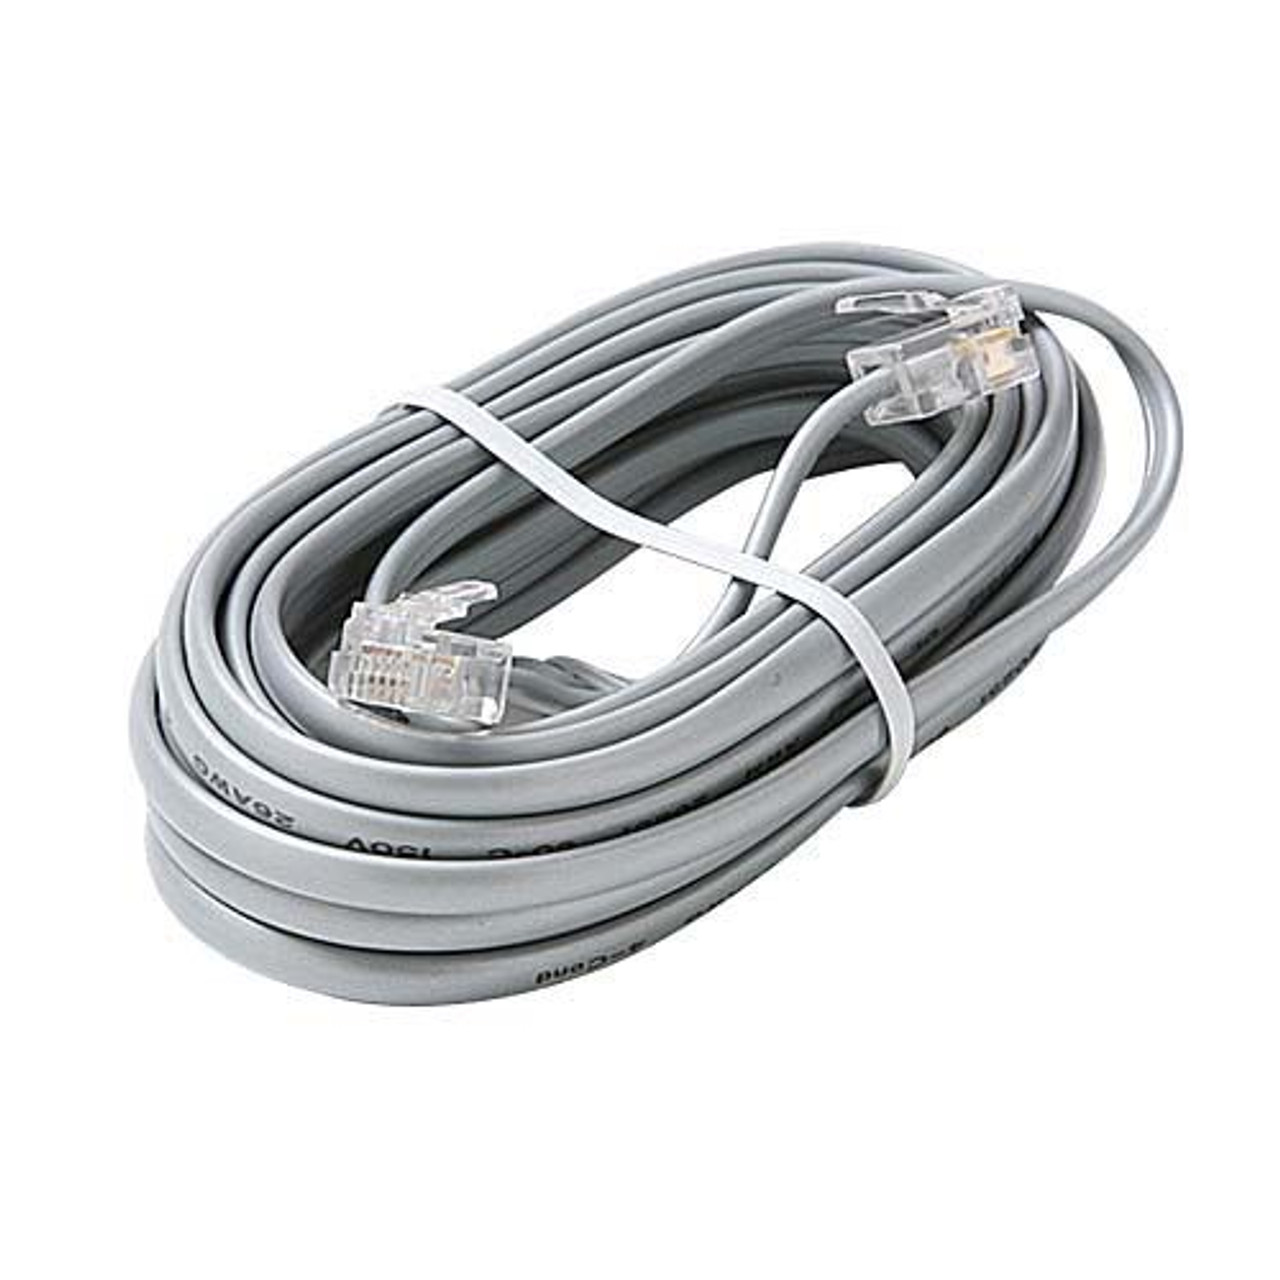 Steren 304-725SL 25' FT 4 Conductor Data Cable Silver Satin Flat Modular 28 AWG Transfer Wire RJ11 6P4C Plug Jack Connect Silver Satin Gray Data Communication Extension Cable, Part # 304725-SL